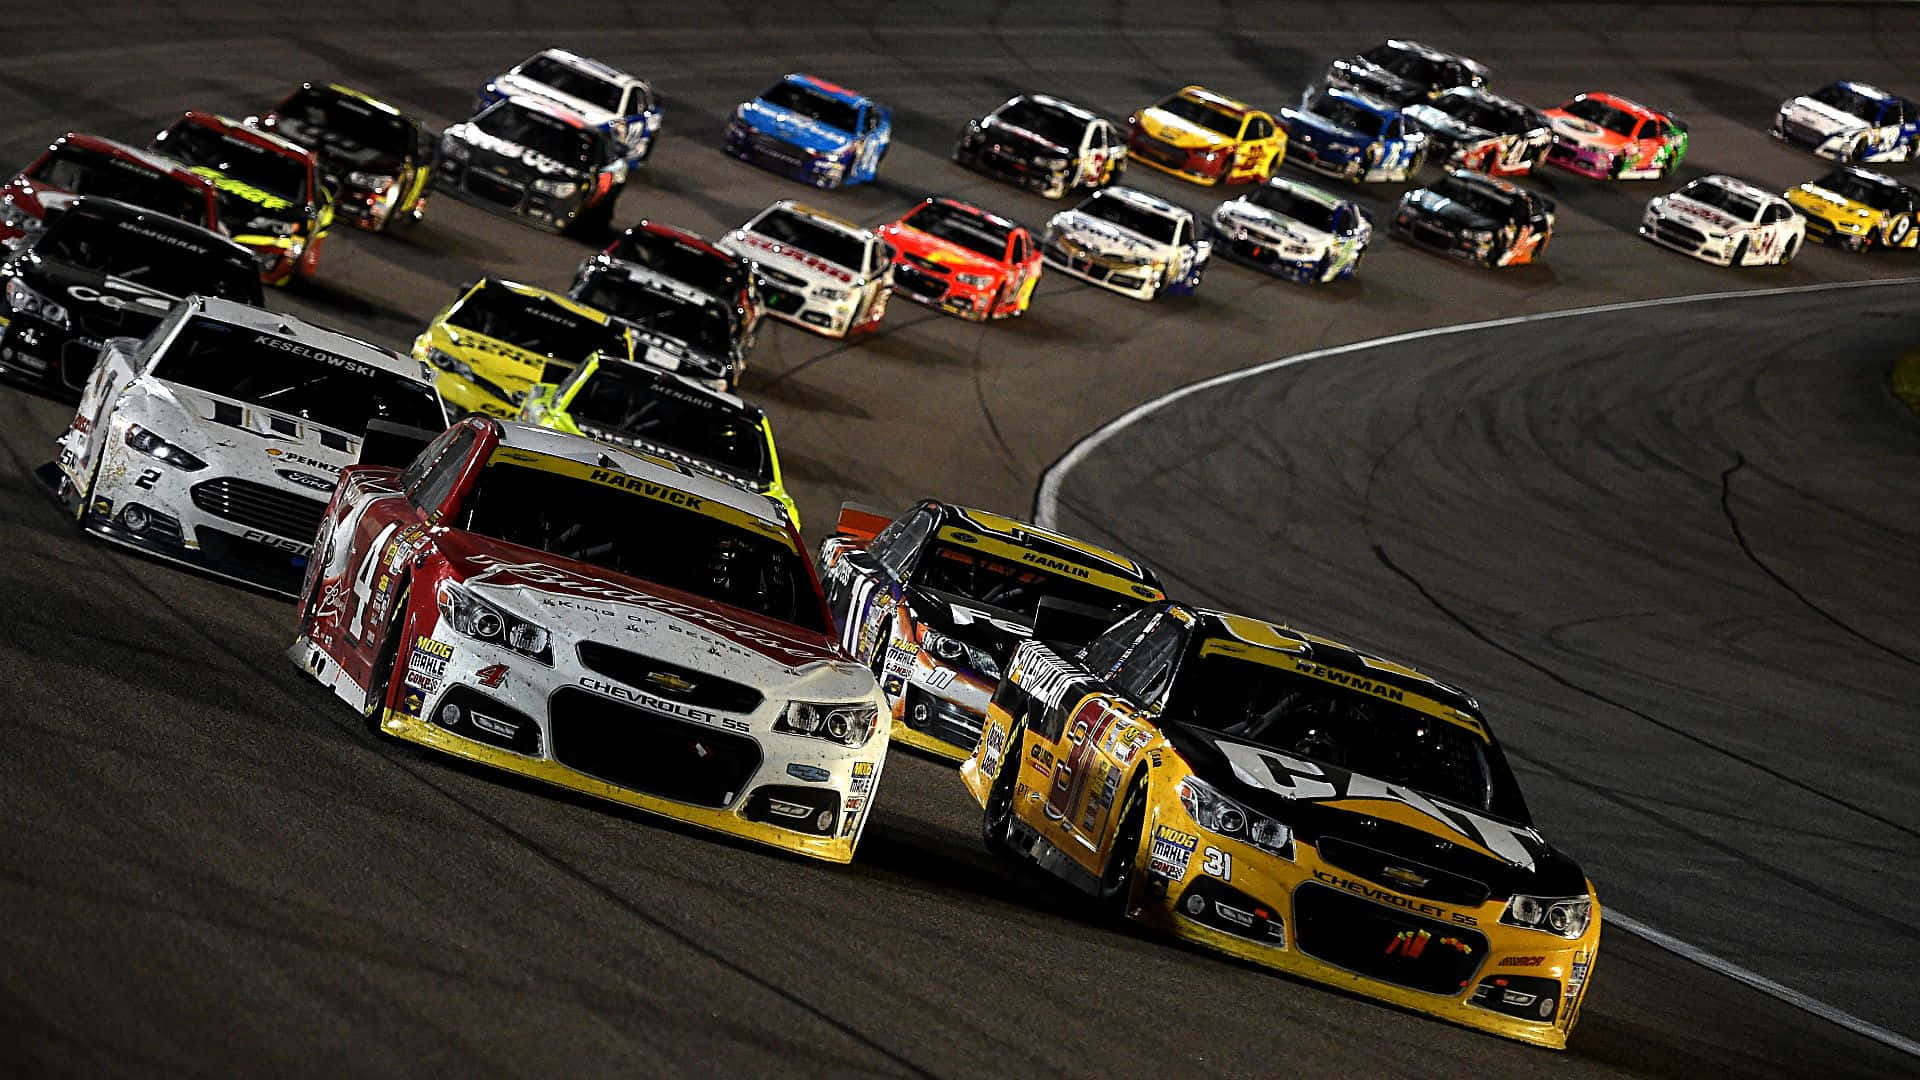 Get Ready for the Stage: The Start of a Legendary NASCAR Race